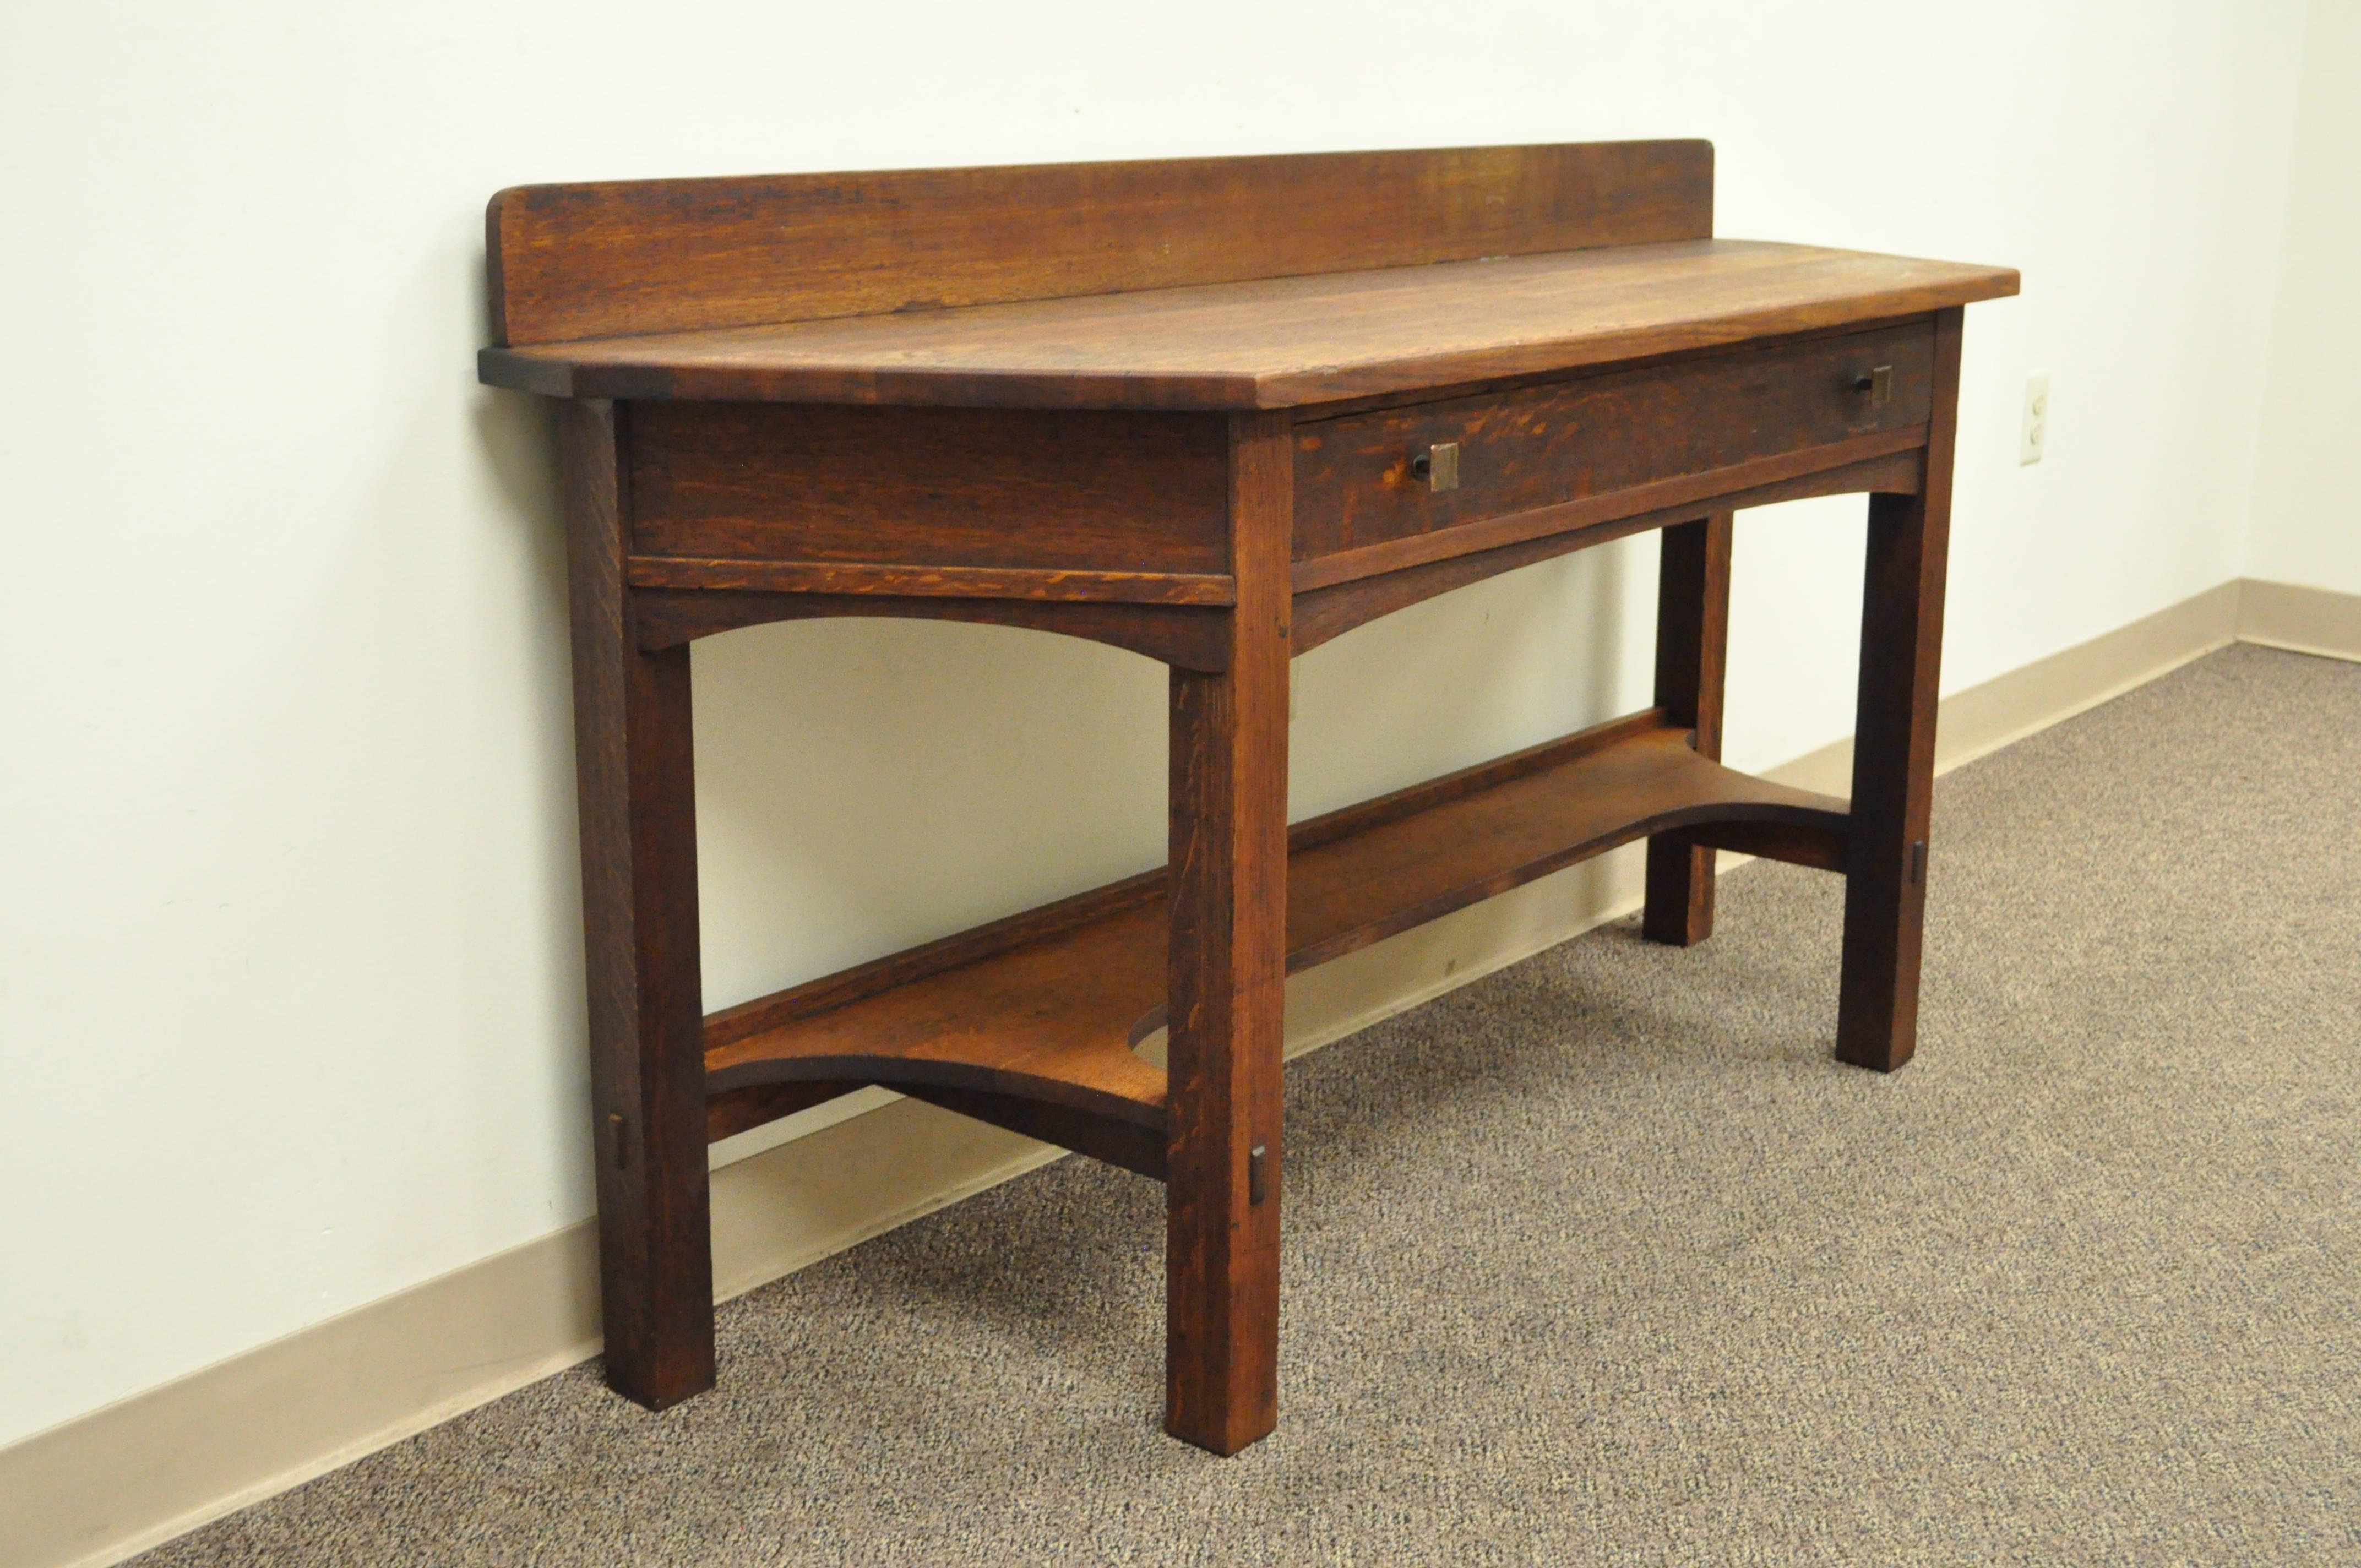 Very rare one-drawer mission oak console table by Limbert with backsplash, circa 1910, grand rapids, MI. Item features a single drawer, hand-hammered copper pulls, over a shaped skirt, exposed tenons, raised backsplash, and Limbert brand on the